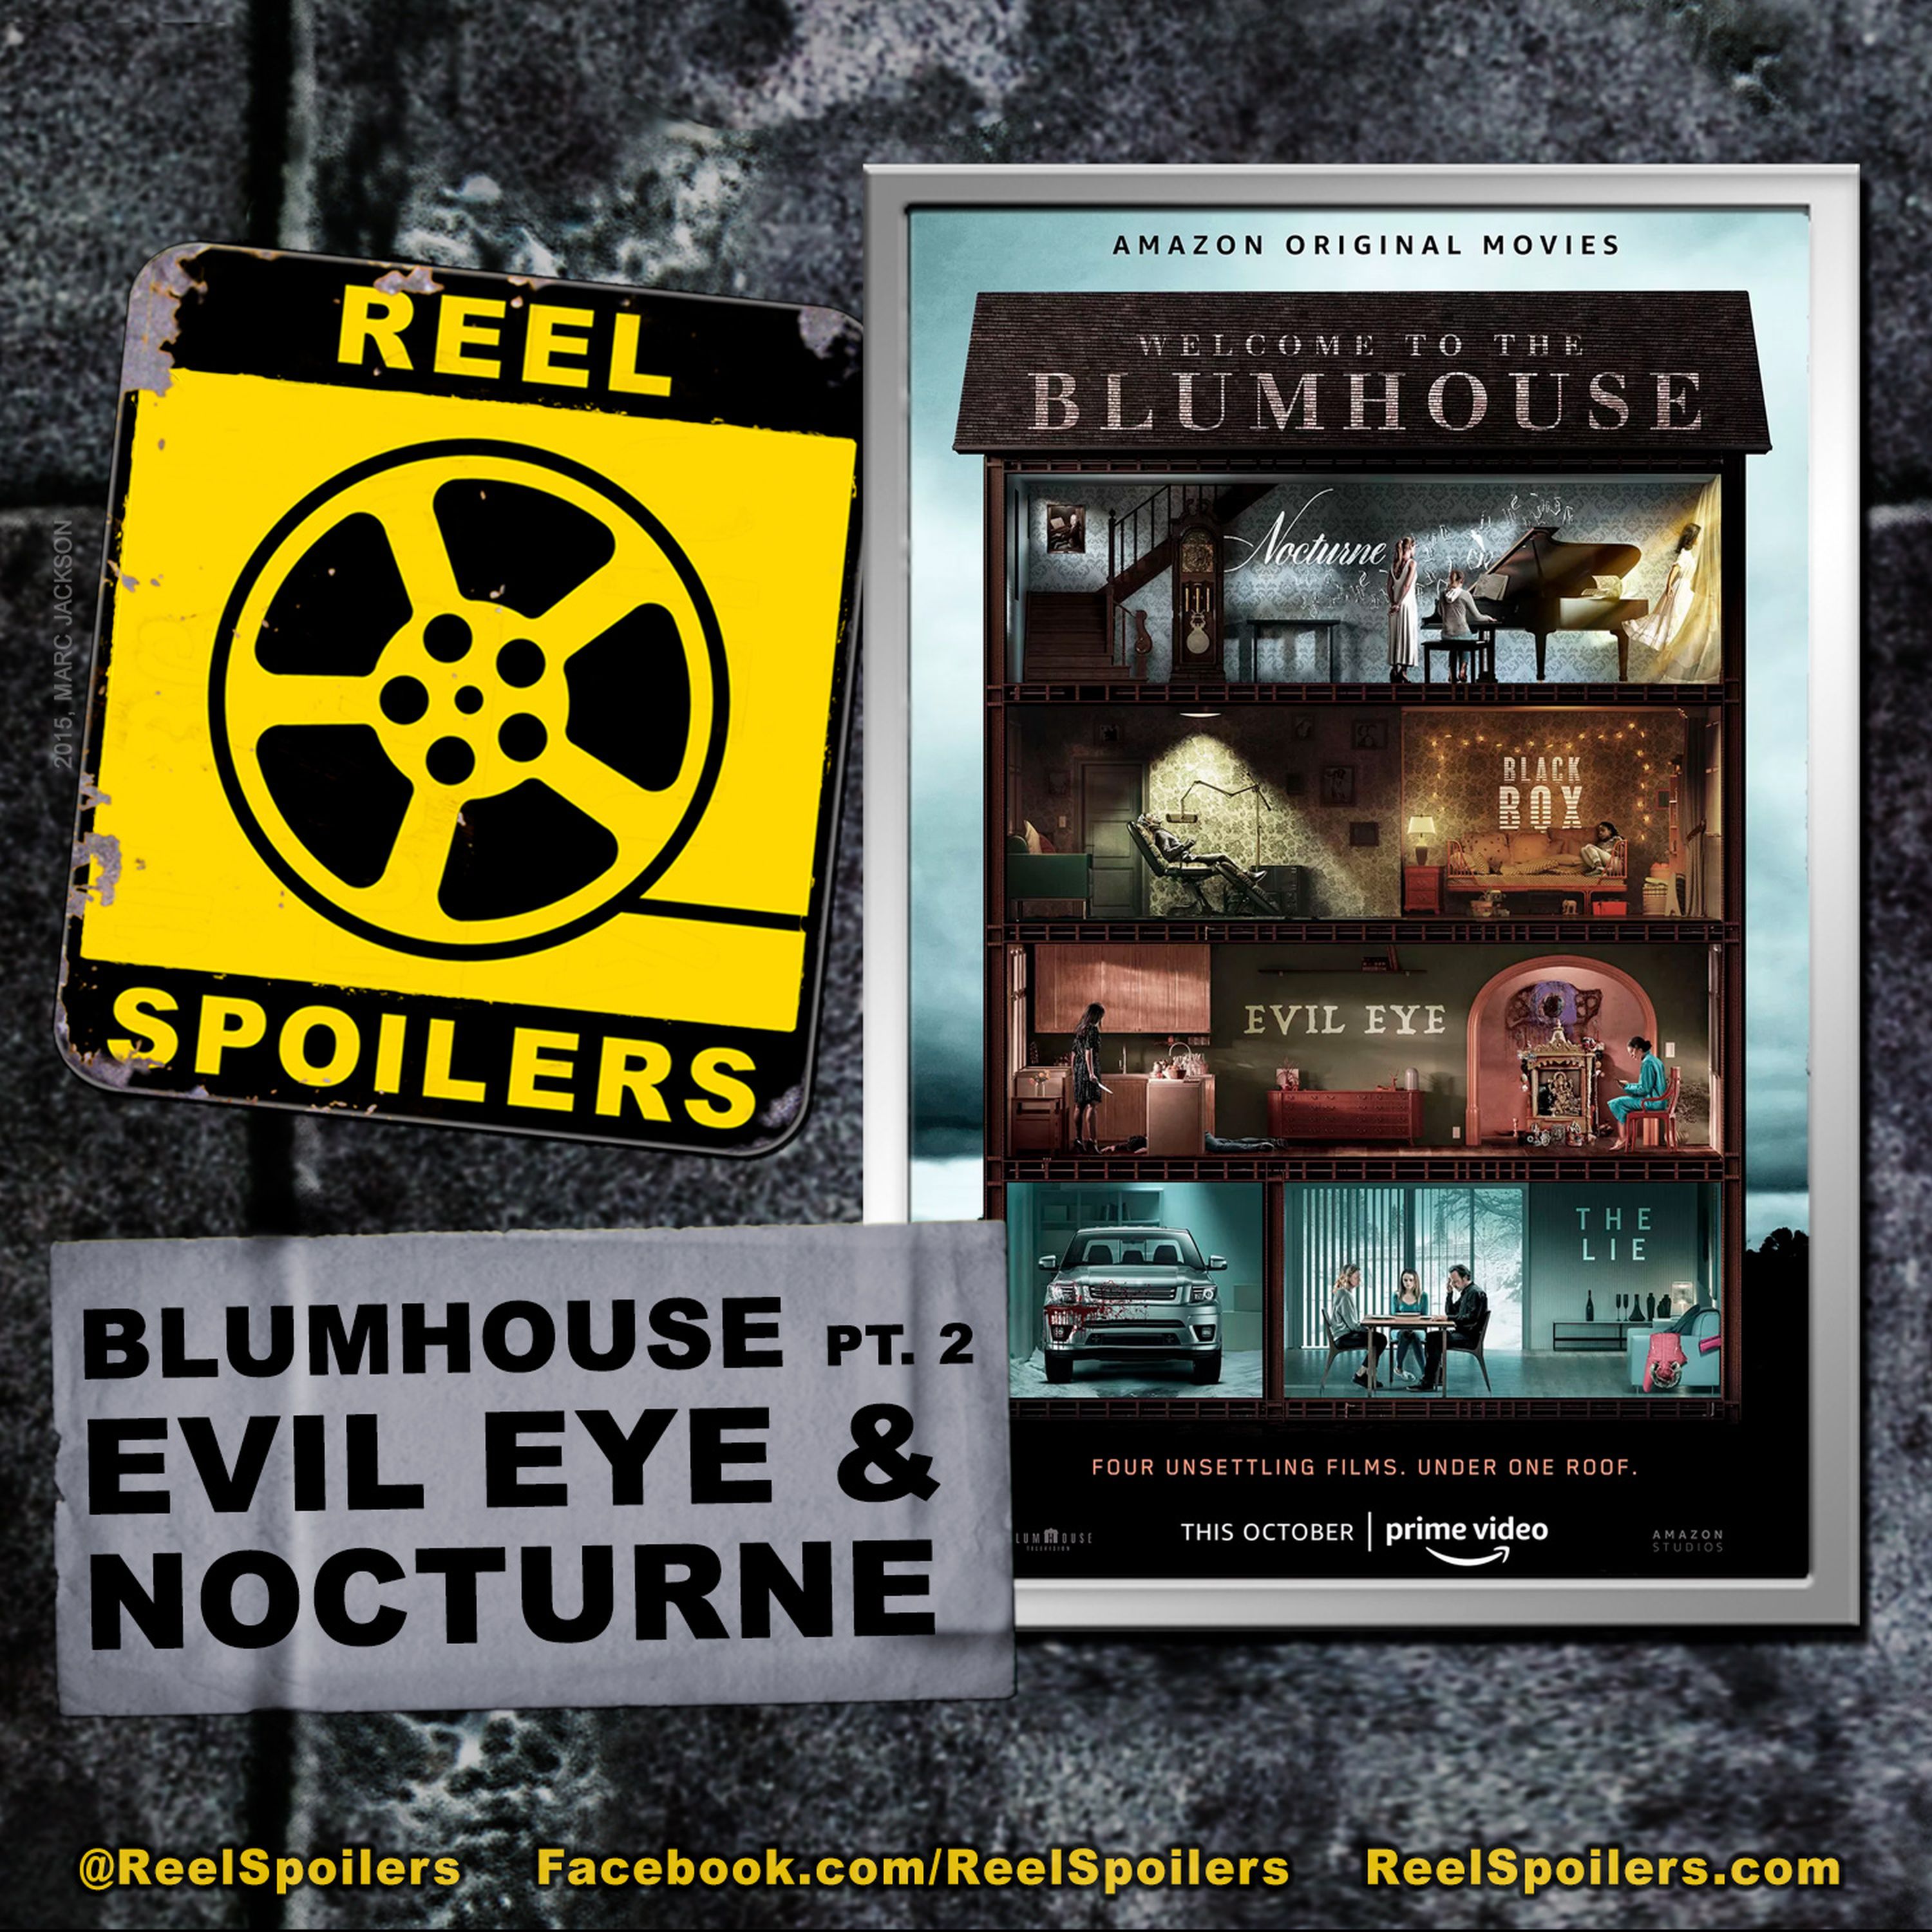 Welcome to the Blumhouse Pt. 2: EVIL EYE and NOCTURNE Image